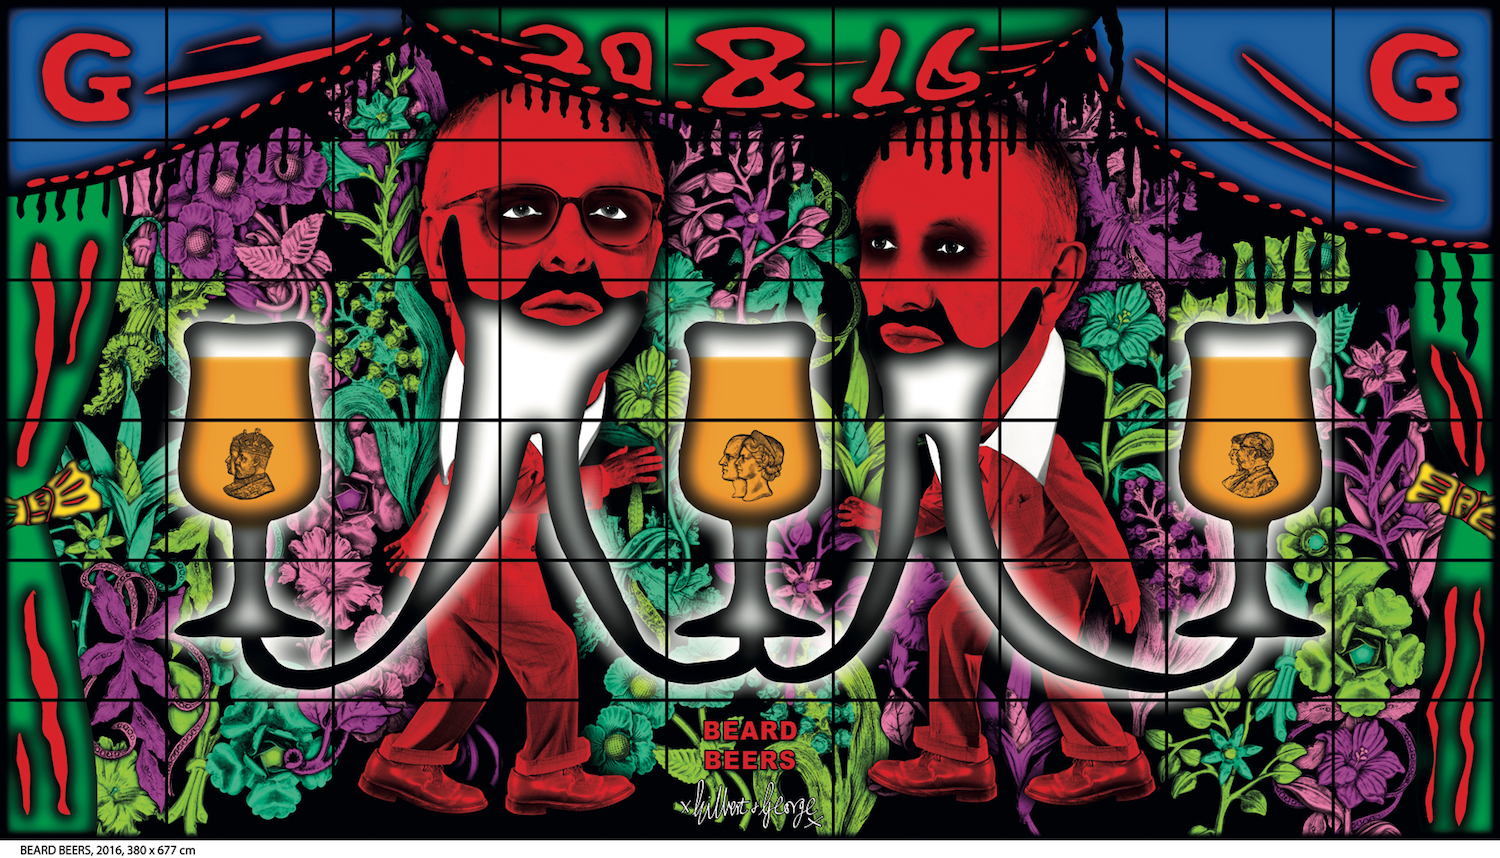 Image: Gilbert and George, BEARD BEERS, 2016. Courtesy of Galerie Thaddaeus Ropac